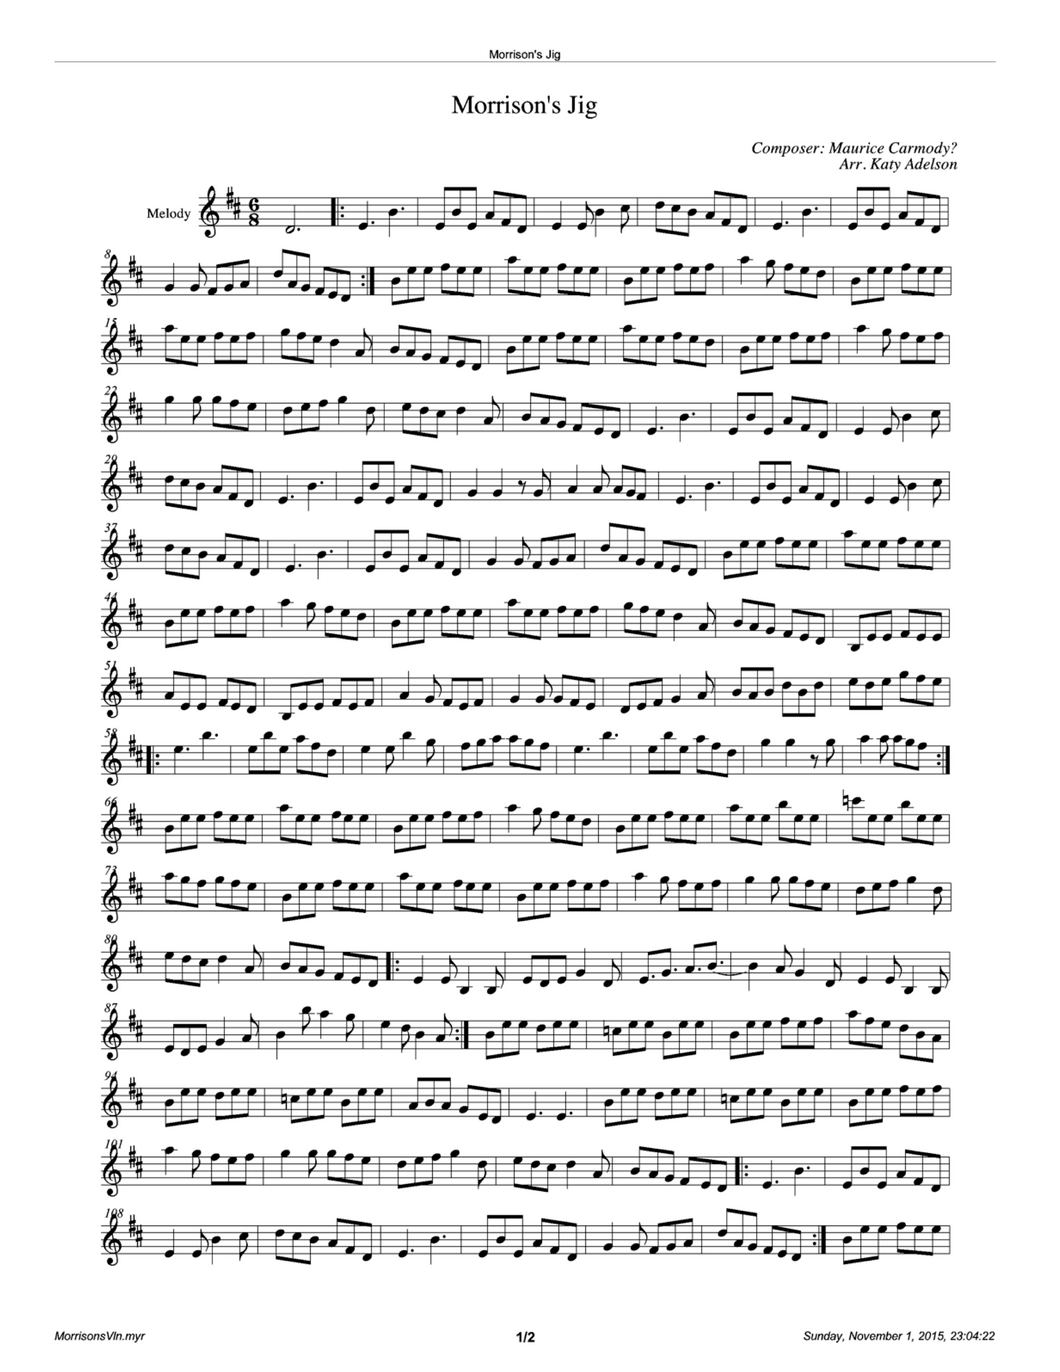 Morrison's Jig Violin Sheet Music - Arranged by Katy Adelson